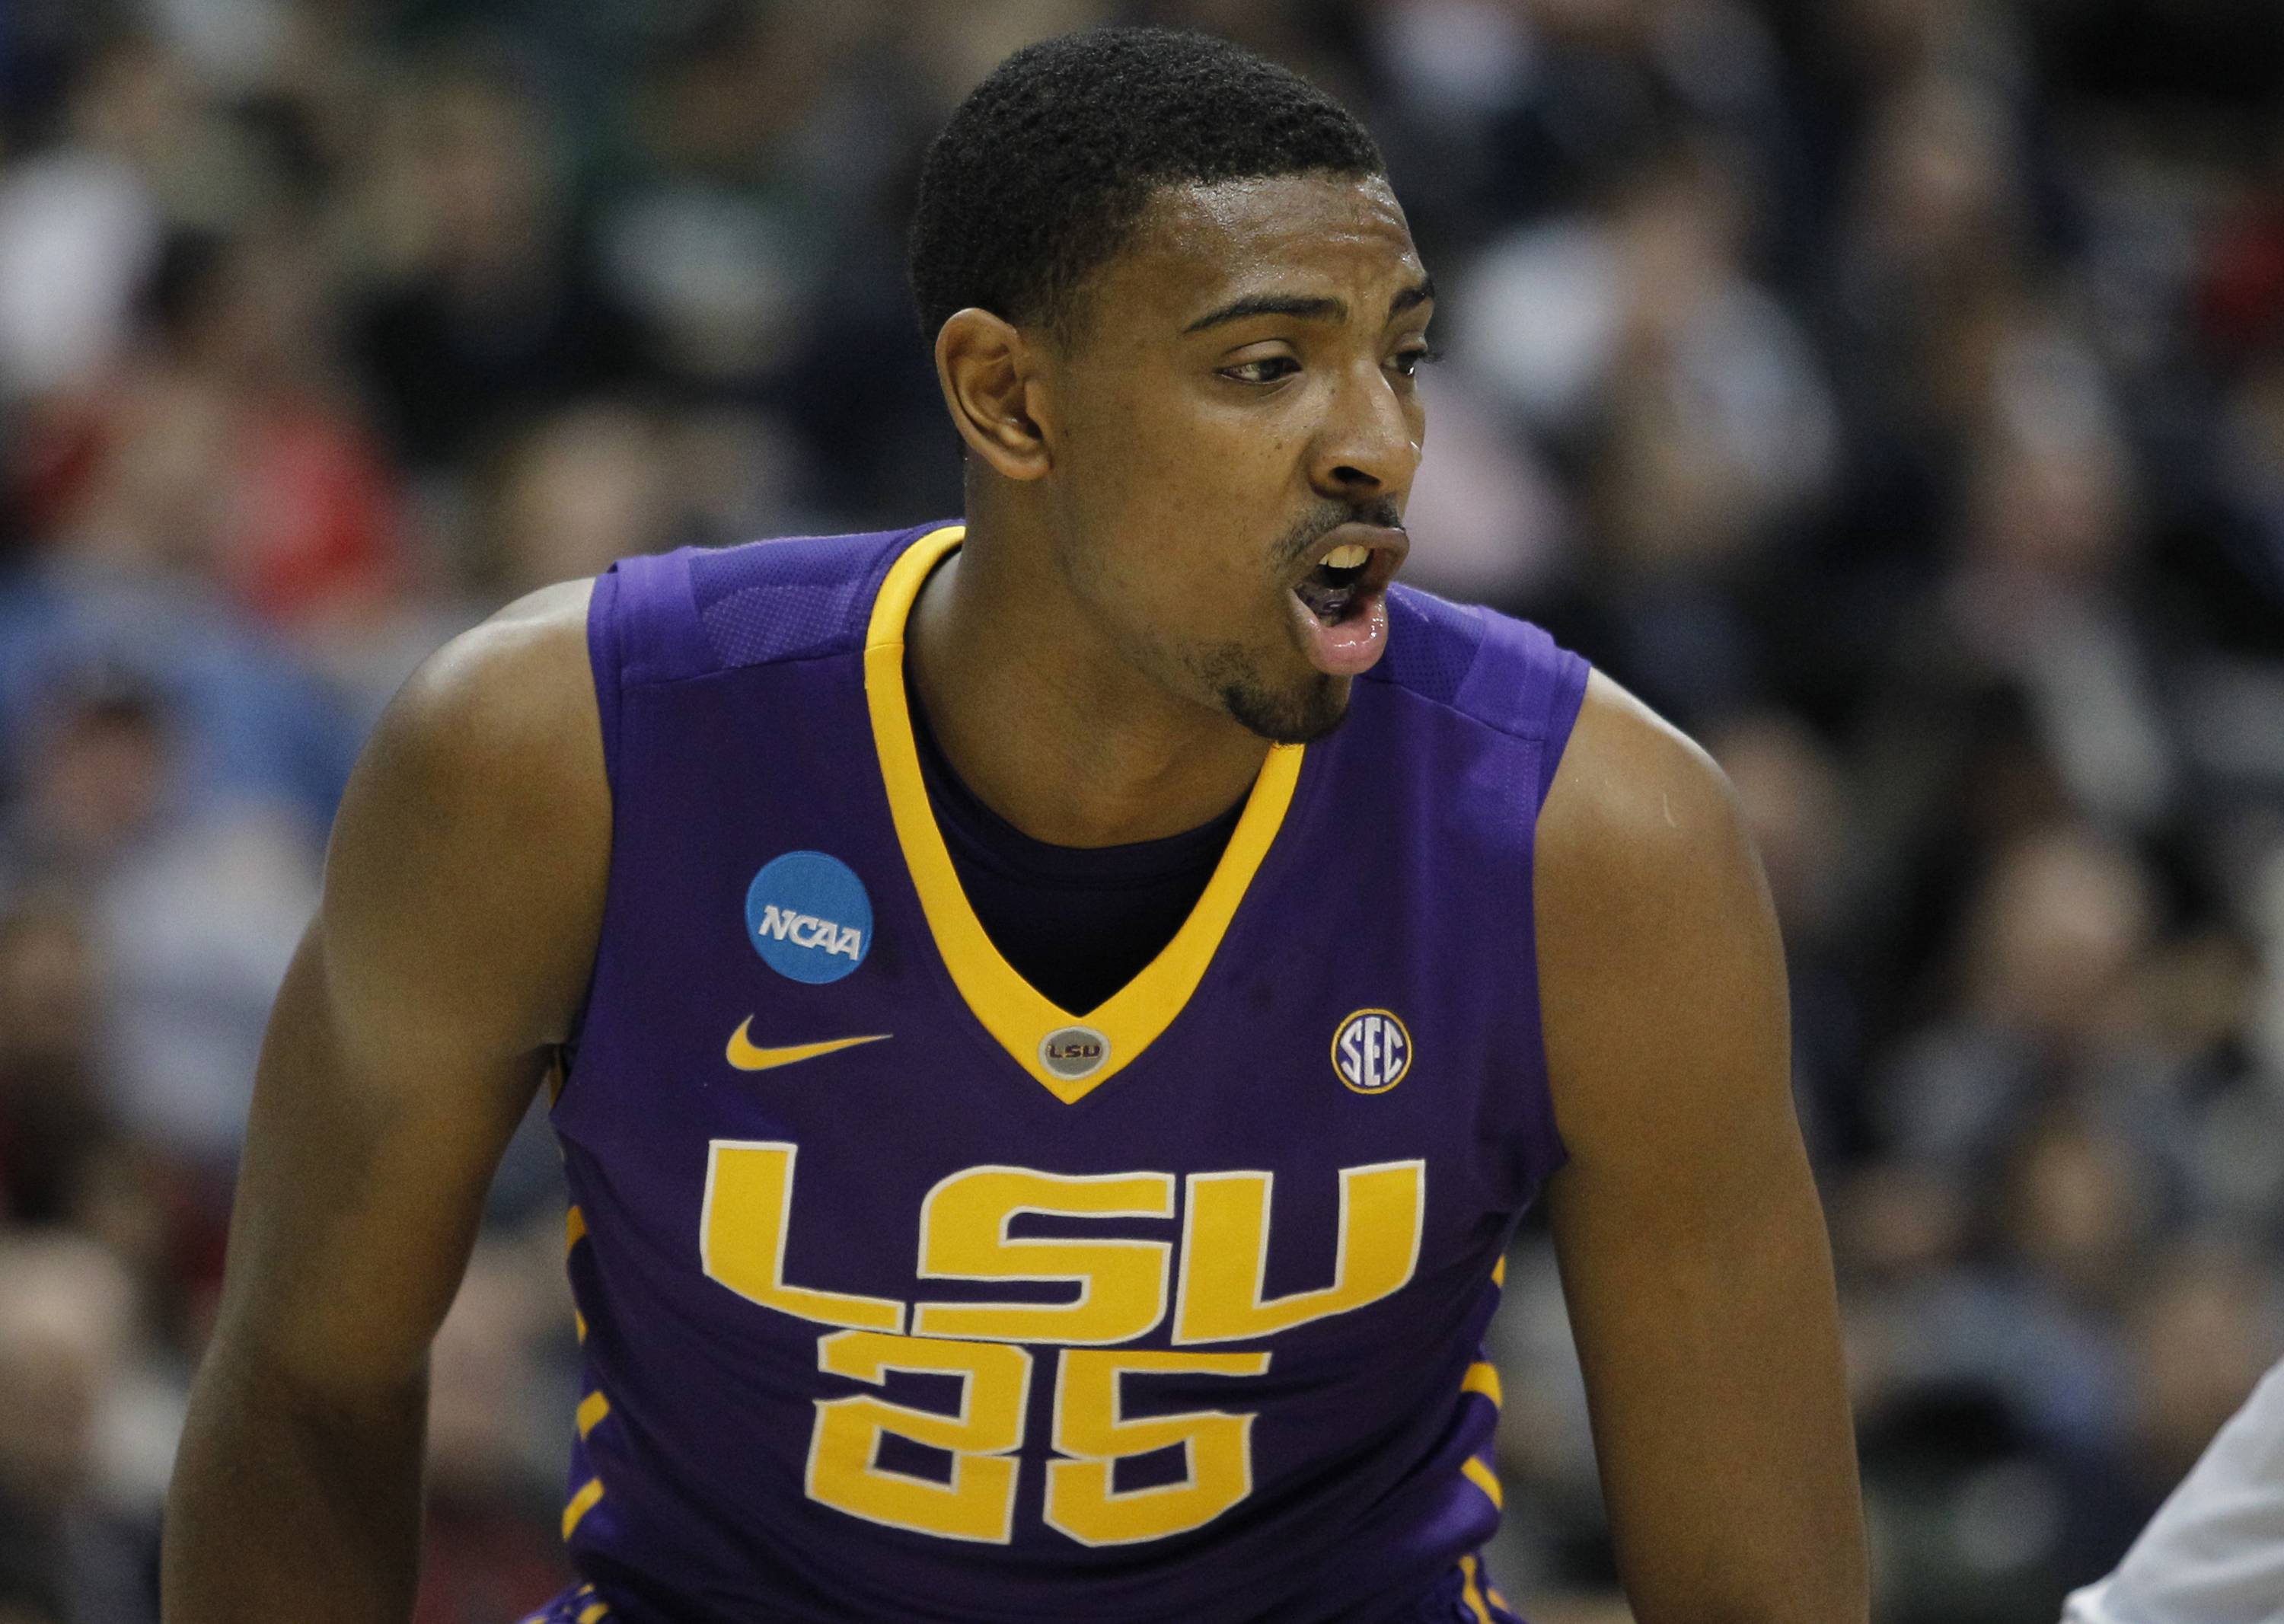 PITTSBURGH, PA - MARCH 19:  Jordan Mickey #25 of the LSU Tigers plays against the North Carolina State Wolfpack during the second round of the 2015 NCAA Men's Basketball Tournament at Consol Energy Center on March 19, 2015 in Pittsburgh, Pennsylvania.  (Photo by Justin K. Aller/Getty Images)